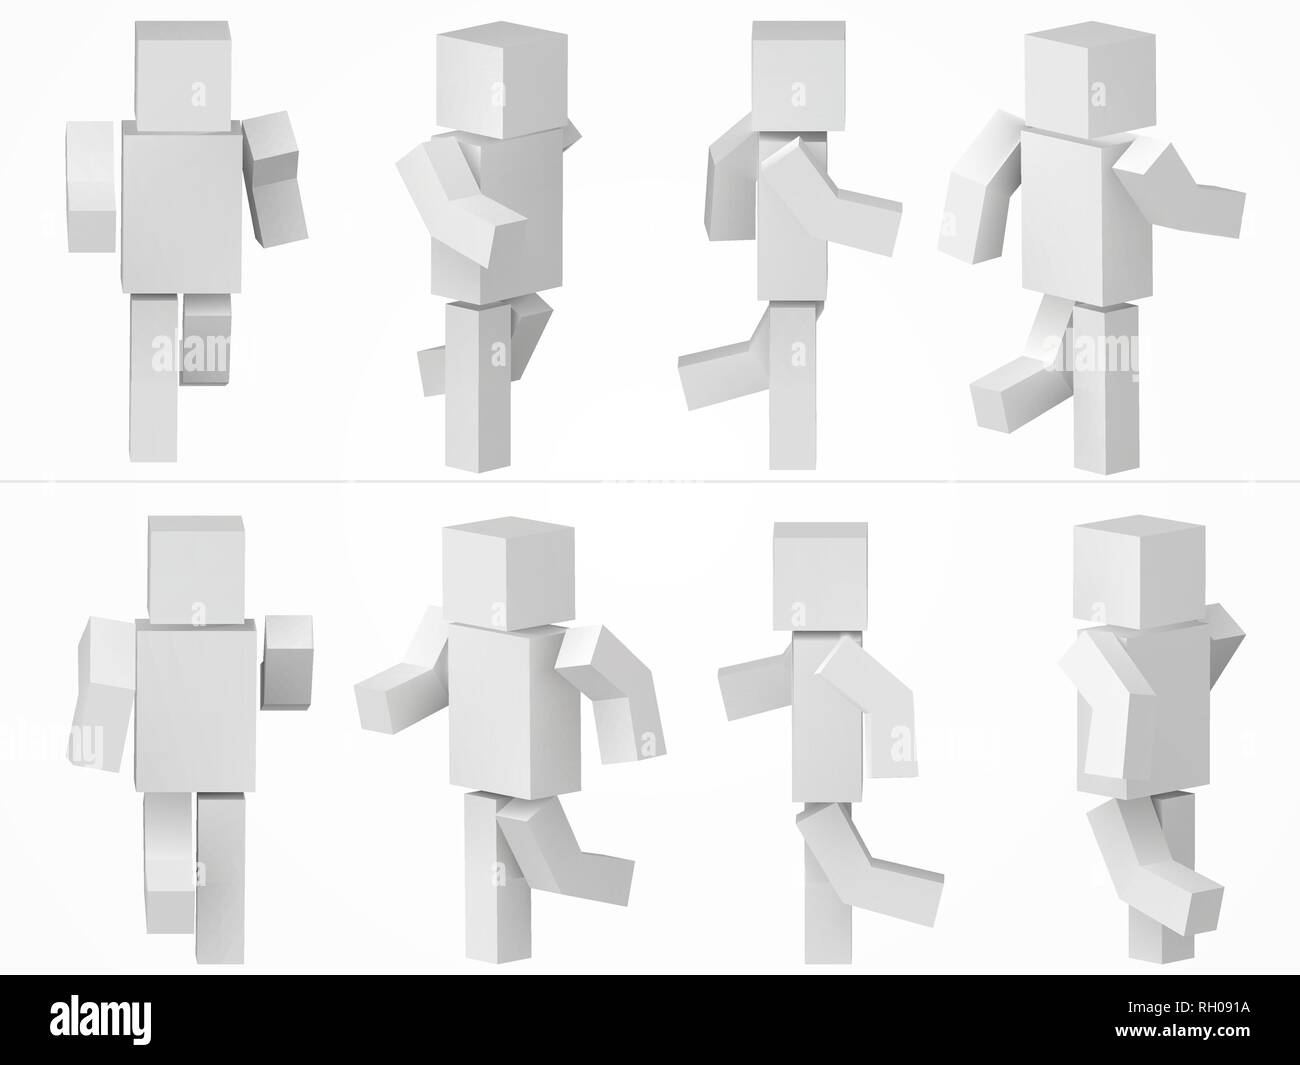 running cubic character. 3d style simple cubic character illustration. Stock Vector